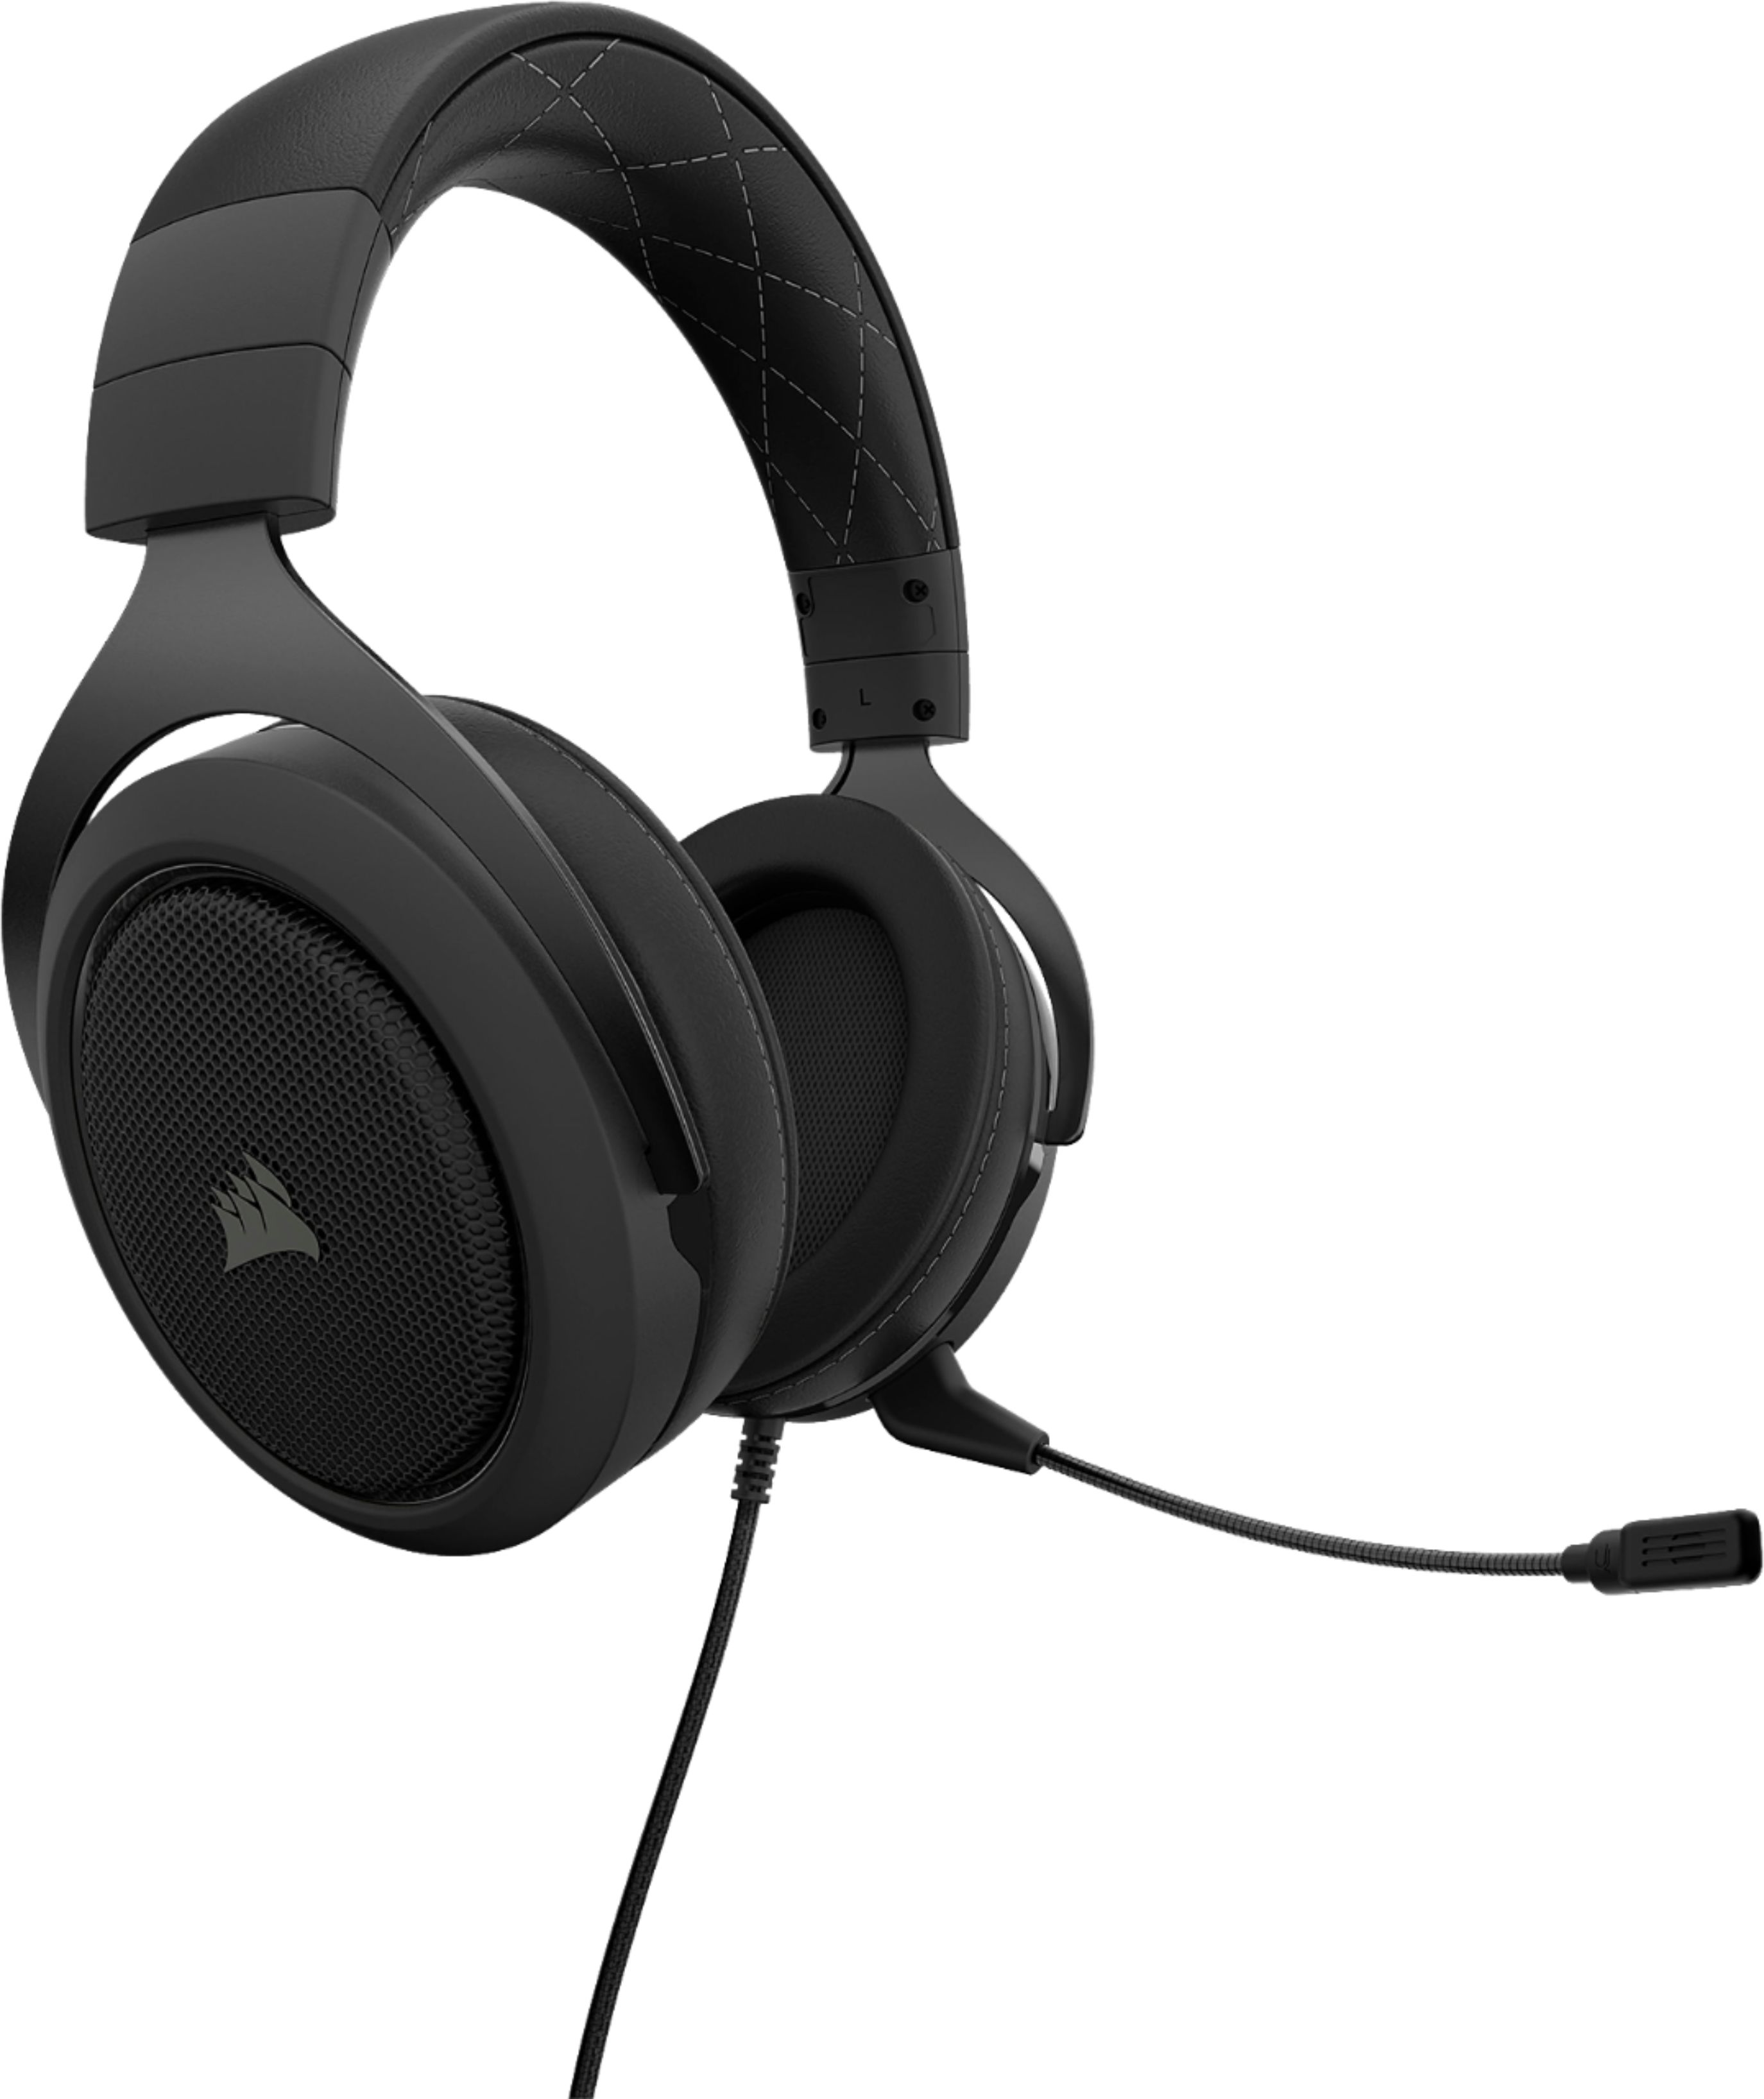 legaal Ontkennen Cadeau CORSAIR HS60 PRO SURROUND Wired Stereo Gaming Headset Carbon CA-9011213-NA  - Best Buy